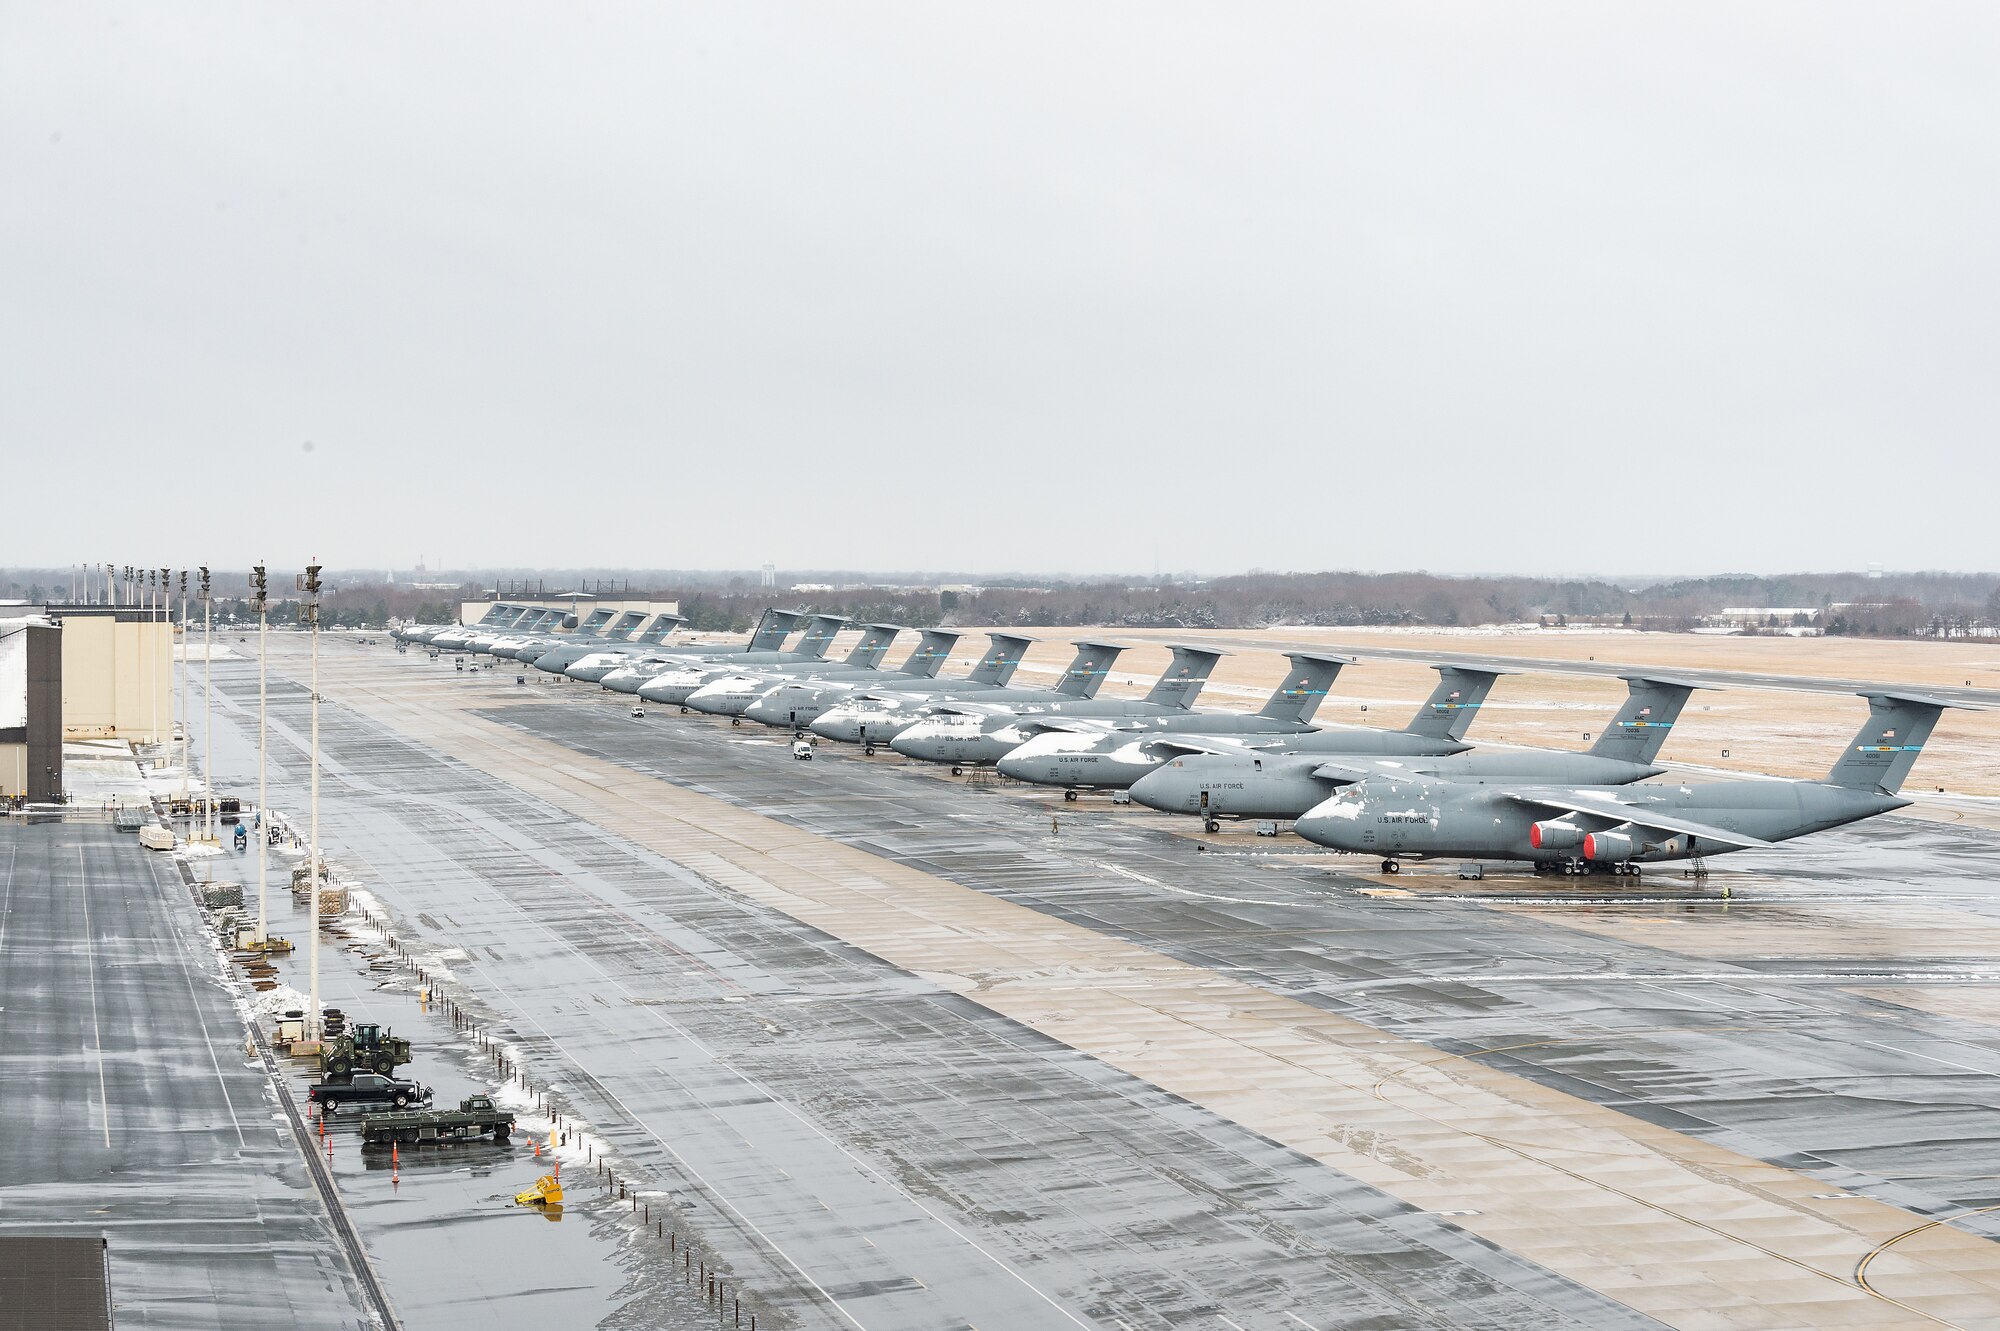 A view from the air traffic control tower of C-5M Super Galaxy and C-17 Globemaster III aircraft parked on the flight line after a nor’easter to produced snow showers at Dover Air Force Base, Delaware, Feb. 2, 2021. As snow fell, the base continued normal operations and prepared for additional forecast snowfall during the next day. (U.S. Air Force photo by Roland Balik)